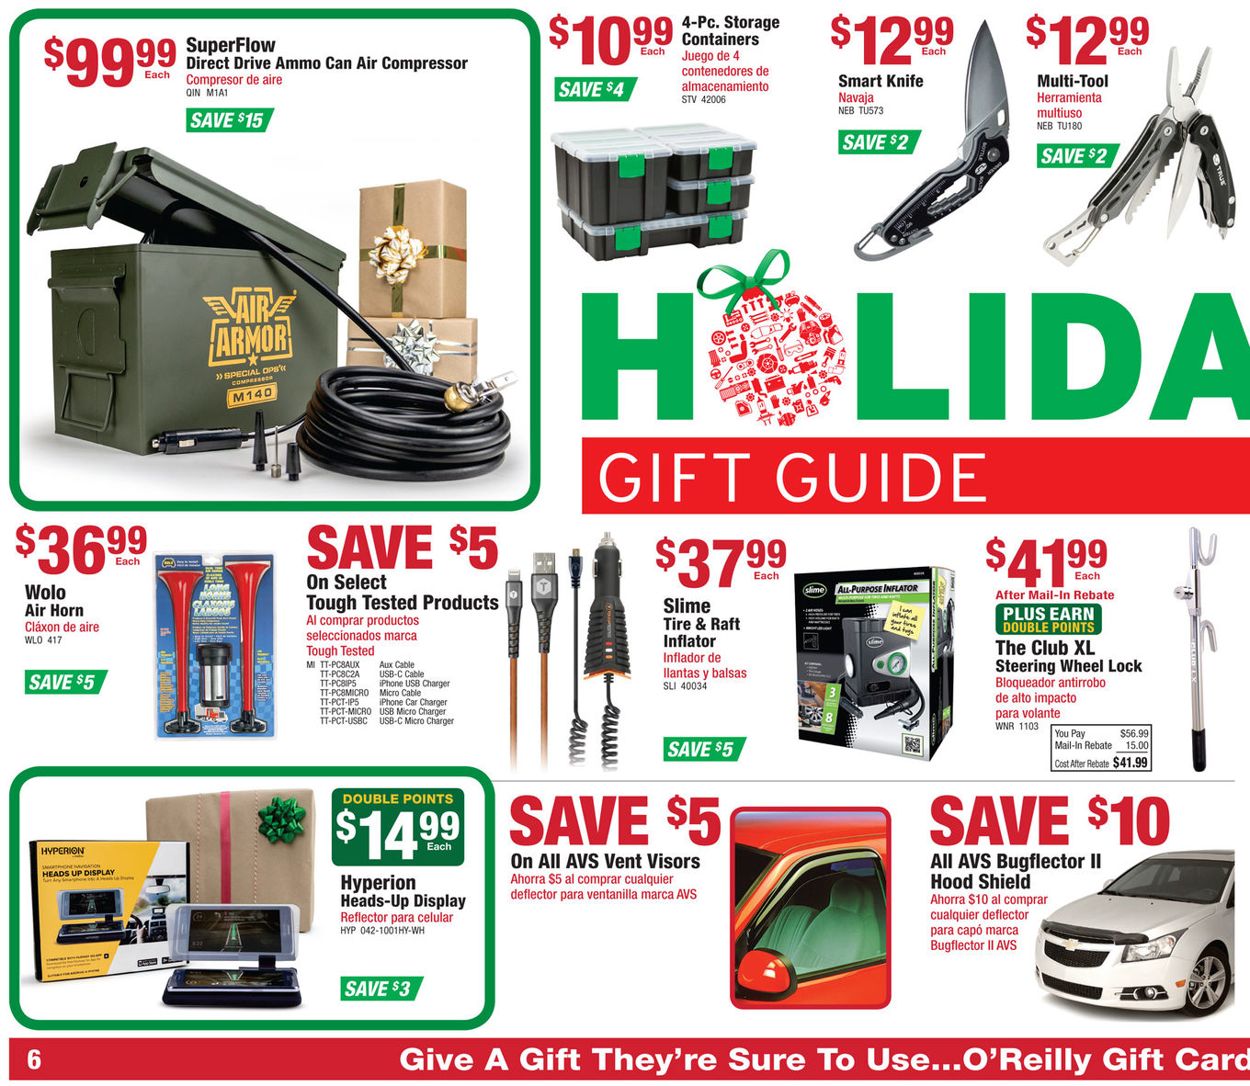 O'Reilly Auto Parts - HOLIDAY GIFT GUIDE 2019 Weekly Ad Circular - valid 11/27-12/24/2019 (Page 6)